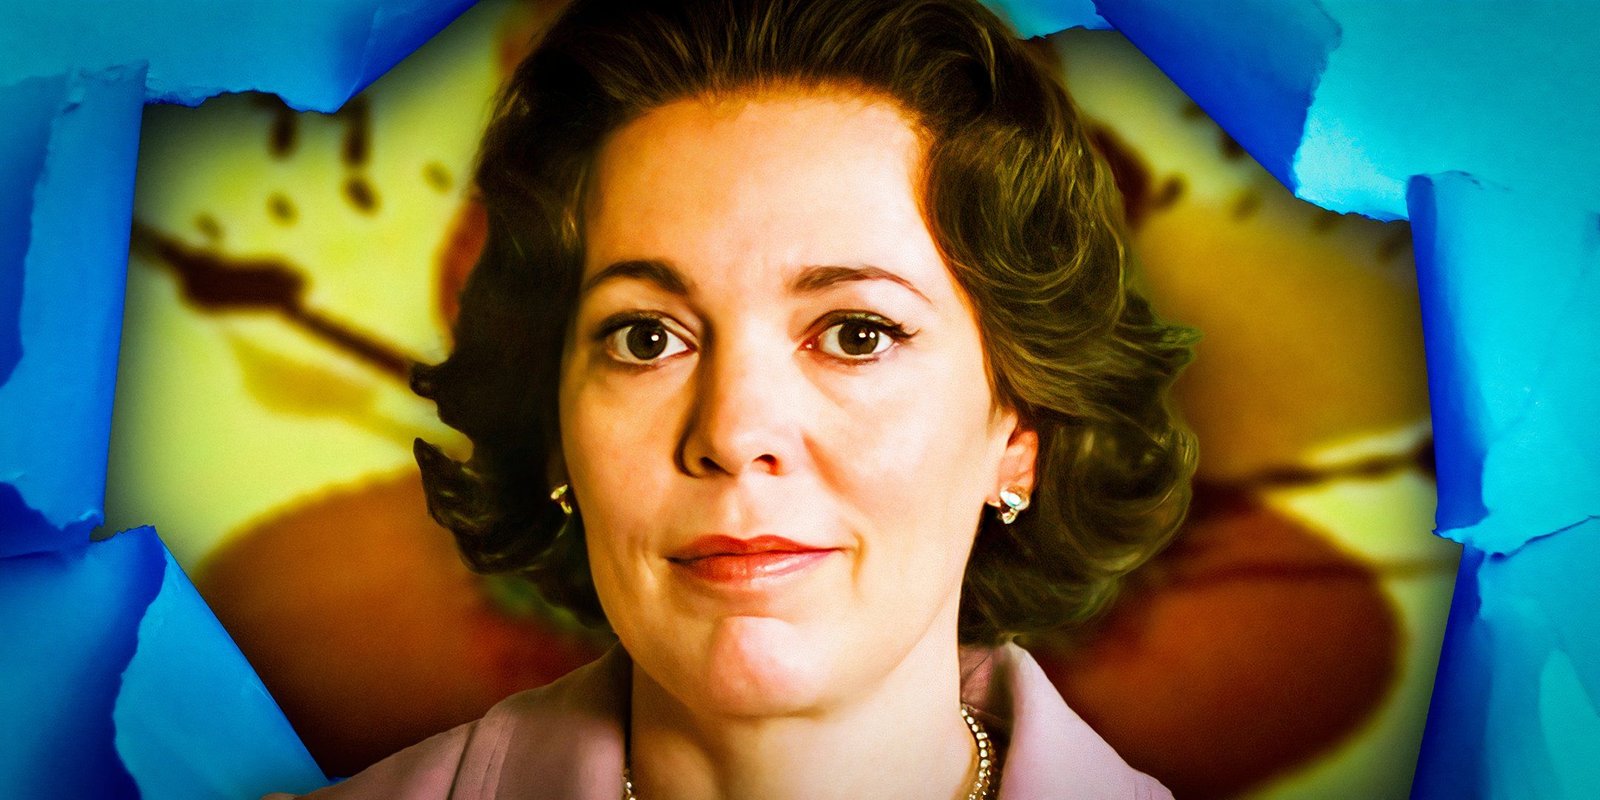 Olivia Colman’s New The Crown Replacement Show Couldn’t Be More Different From Her Queen Elizabeth Role